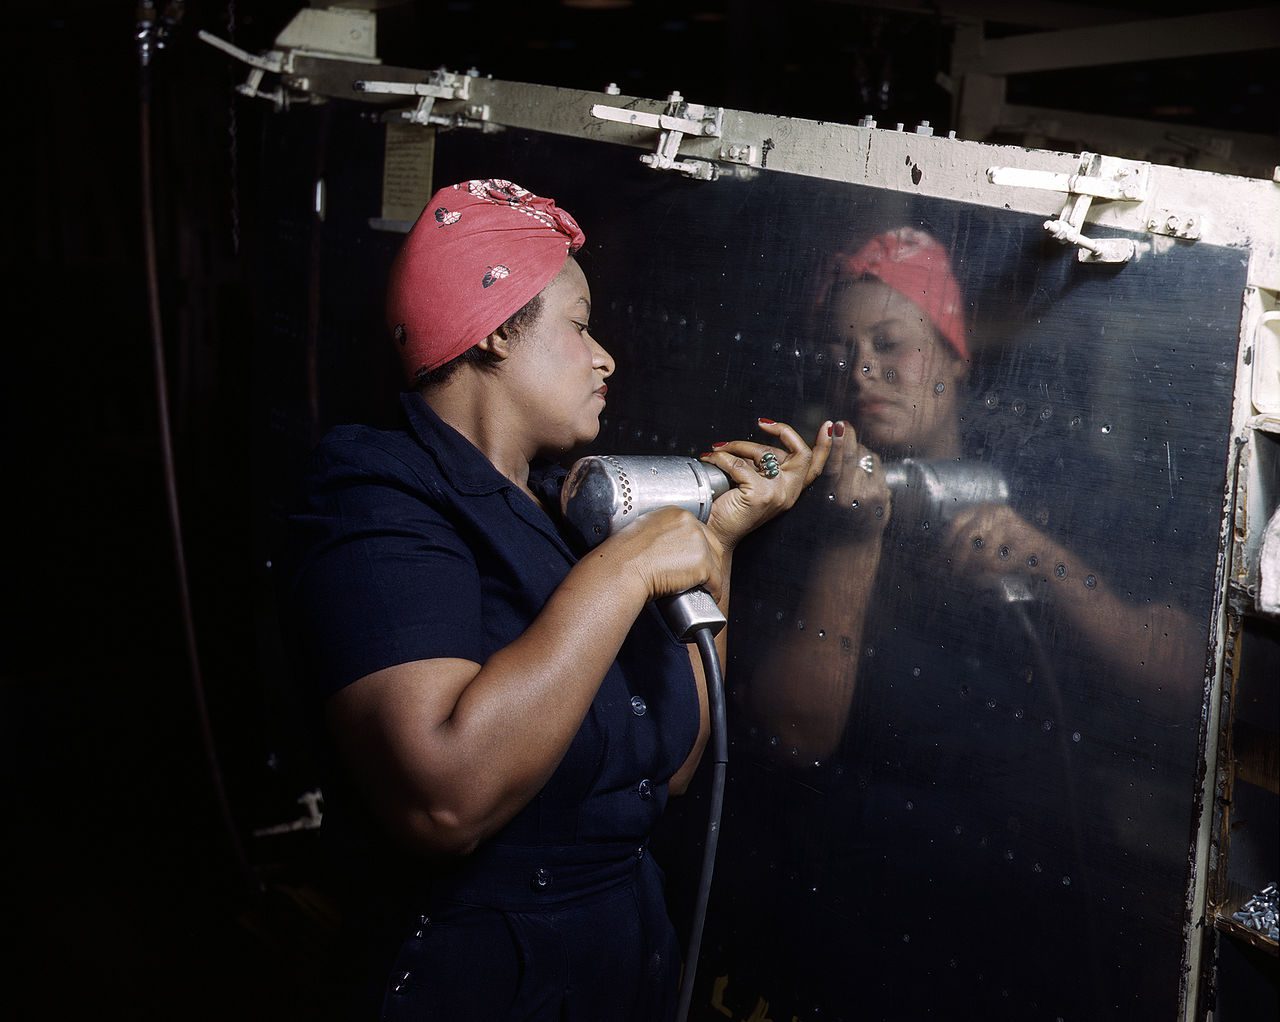 A real-life "Black Rosie" riveting an A-31 Vengeance dive bomber in Tennessee (February 1943) (Credit: Wikimedia) 